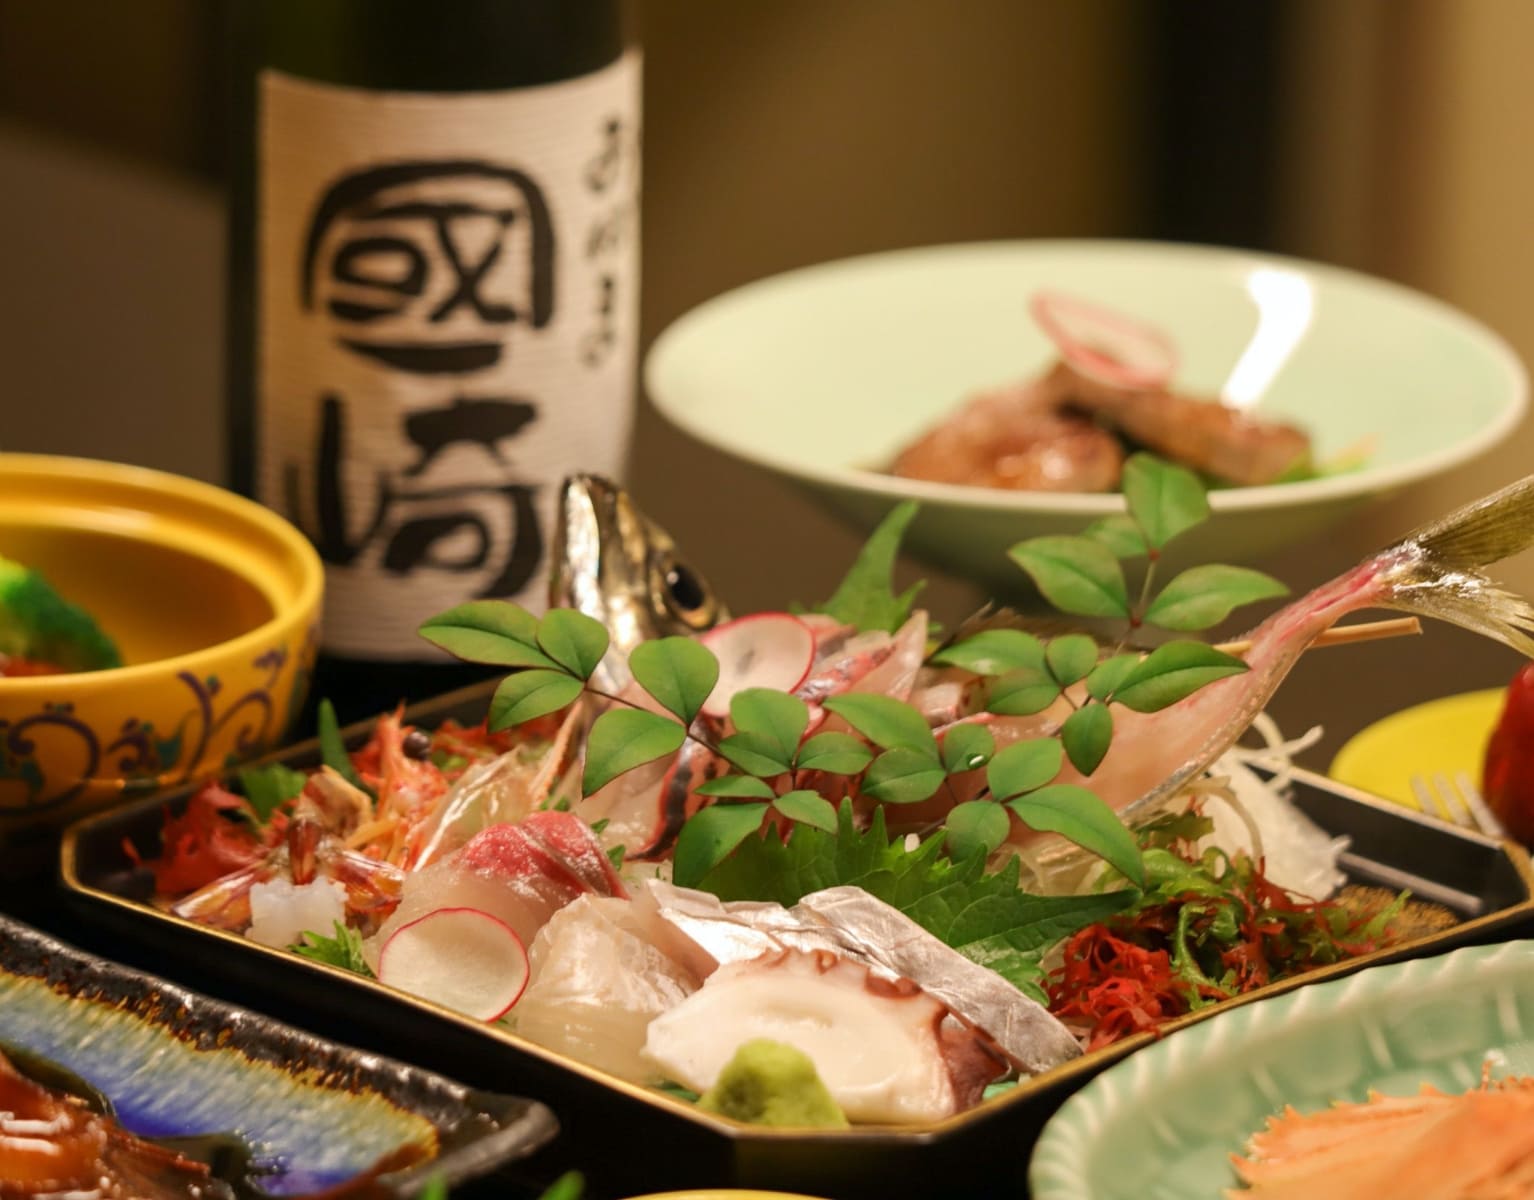 Traditional Japanese cuisine with local ingredients